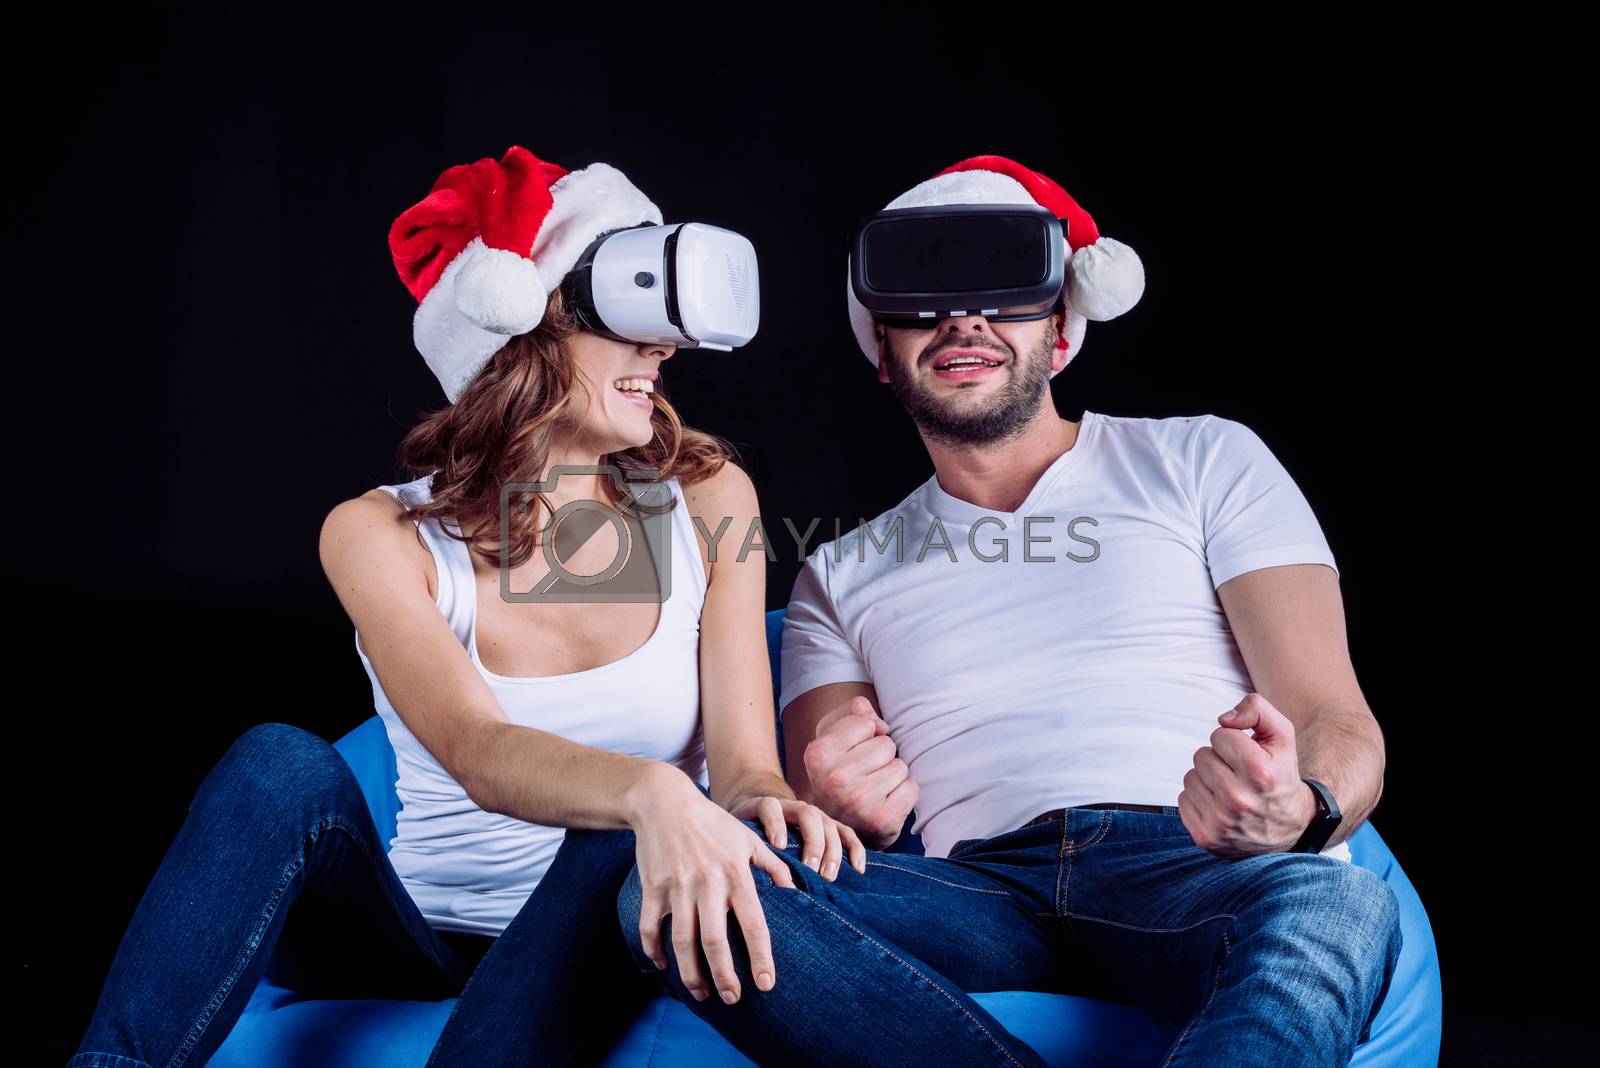 Royalty free image of couple using virtual reality headsets by LightFieldStudios